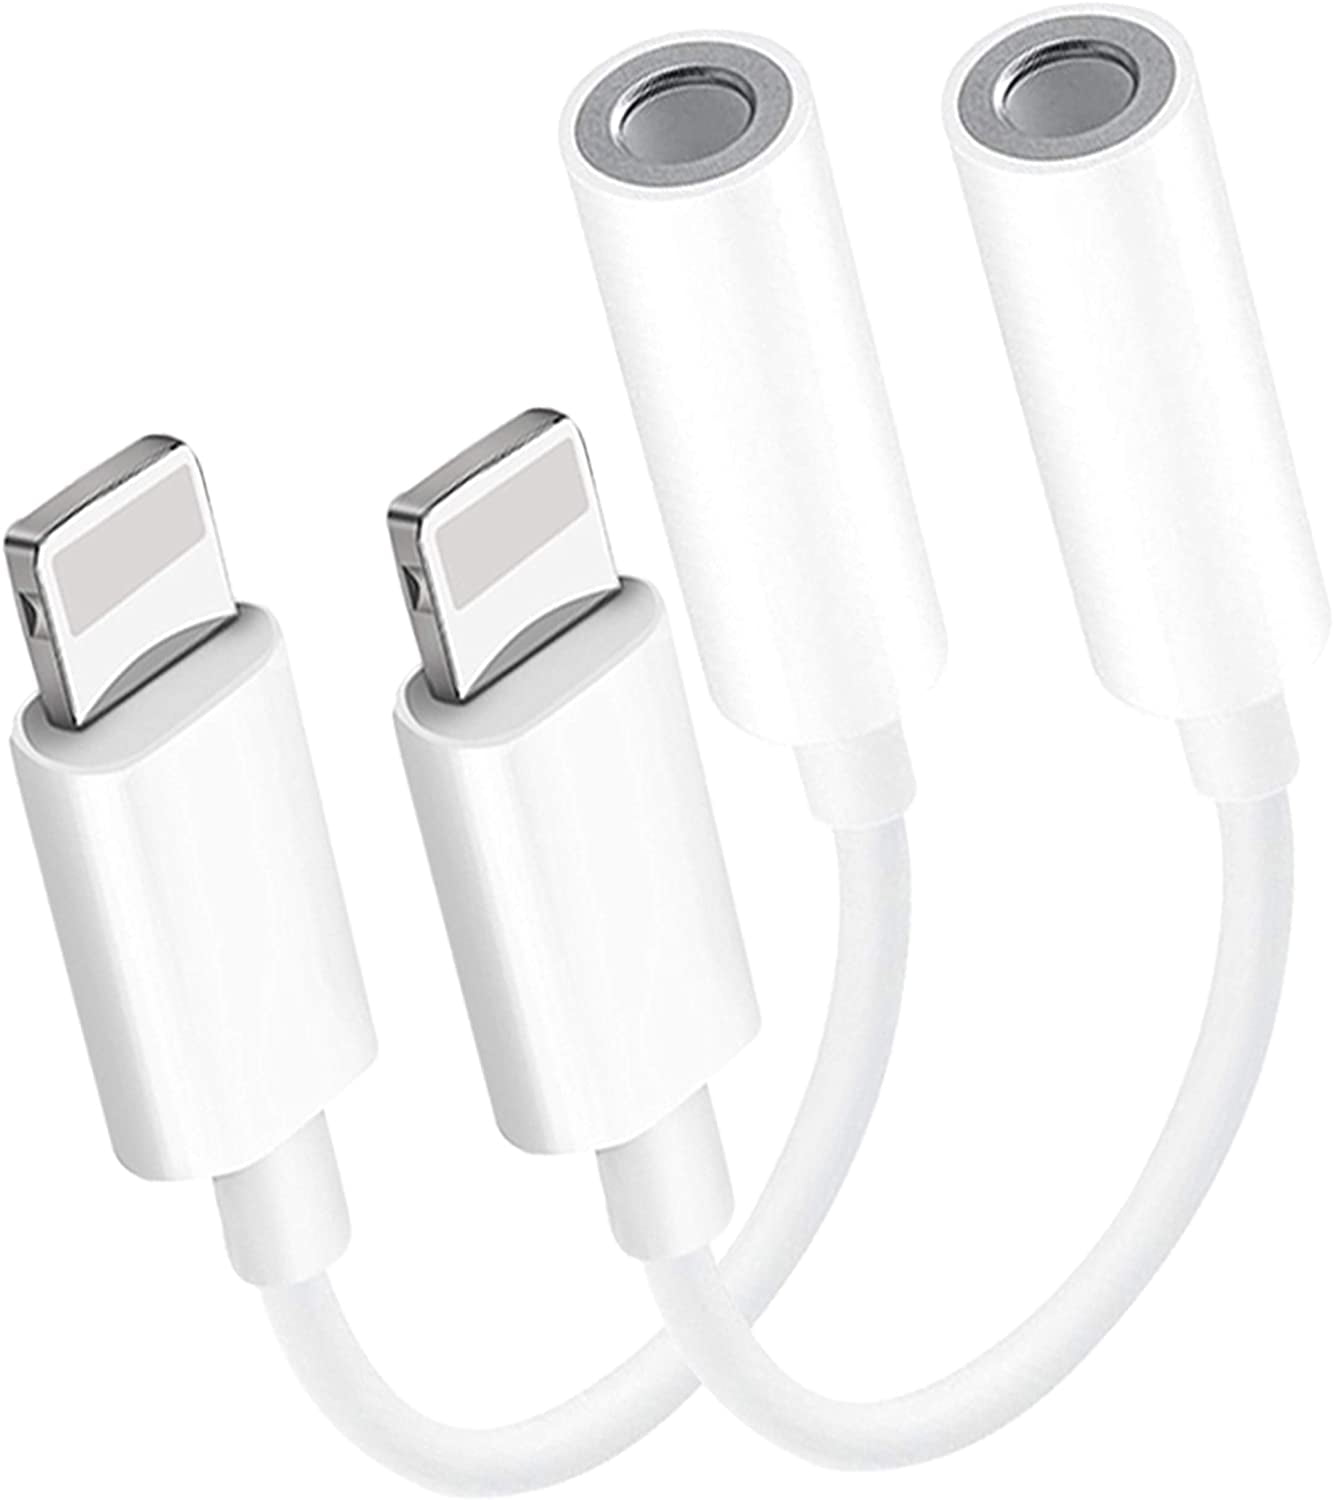 2 Pack for iPhone 3.5mm Jack Headphone Adapter Earphone Converter Earphone Accessories Dongle Aux Audio Plug and Play Adaptor Compatible for iPhone 11 Pro Max X/XS/8 Plus Connector Support All iOS